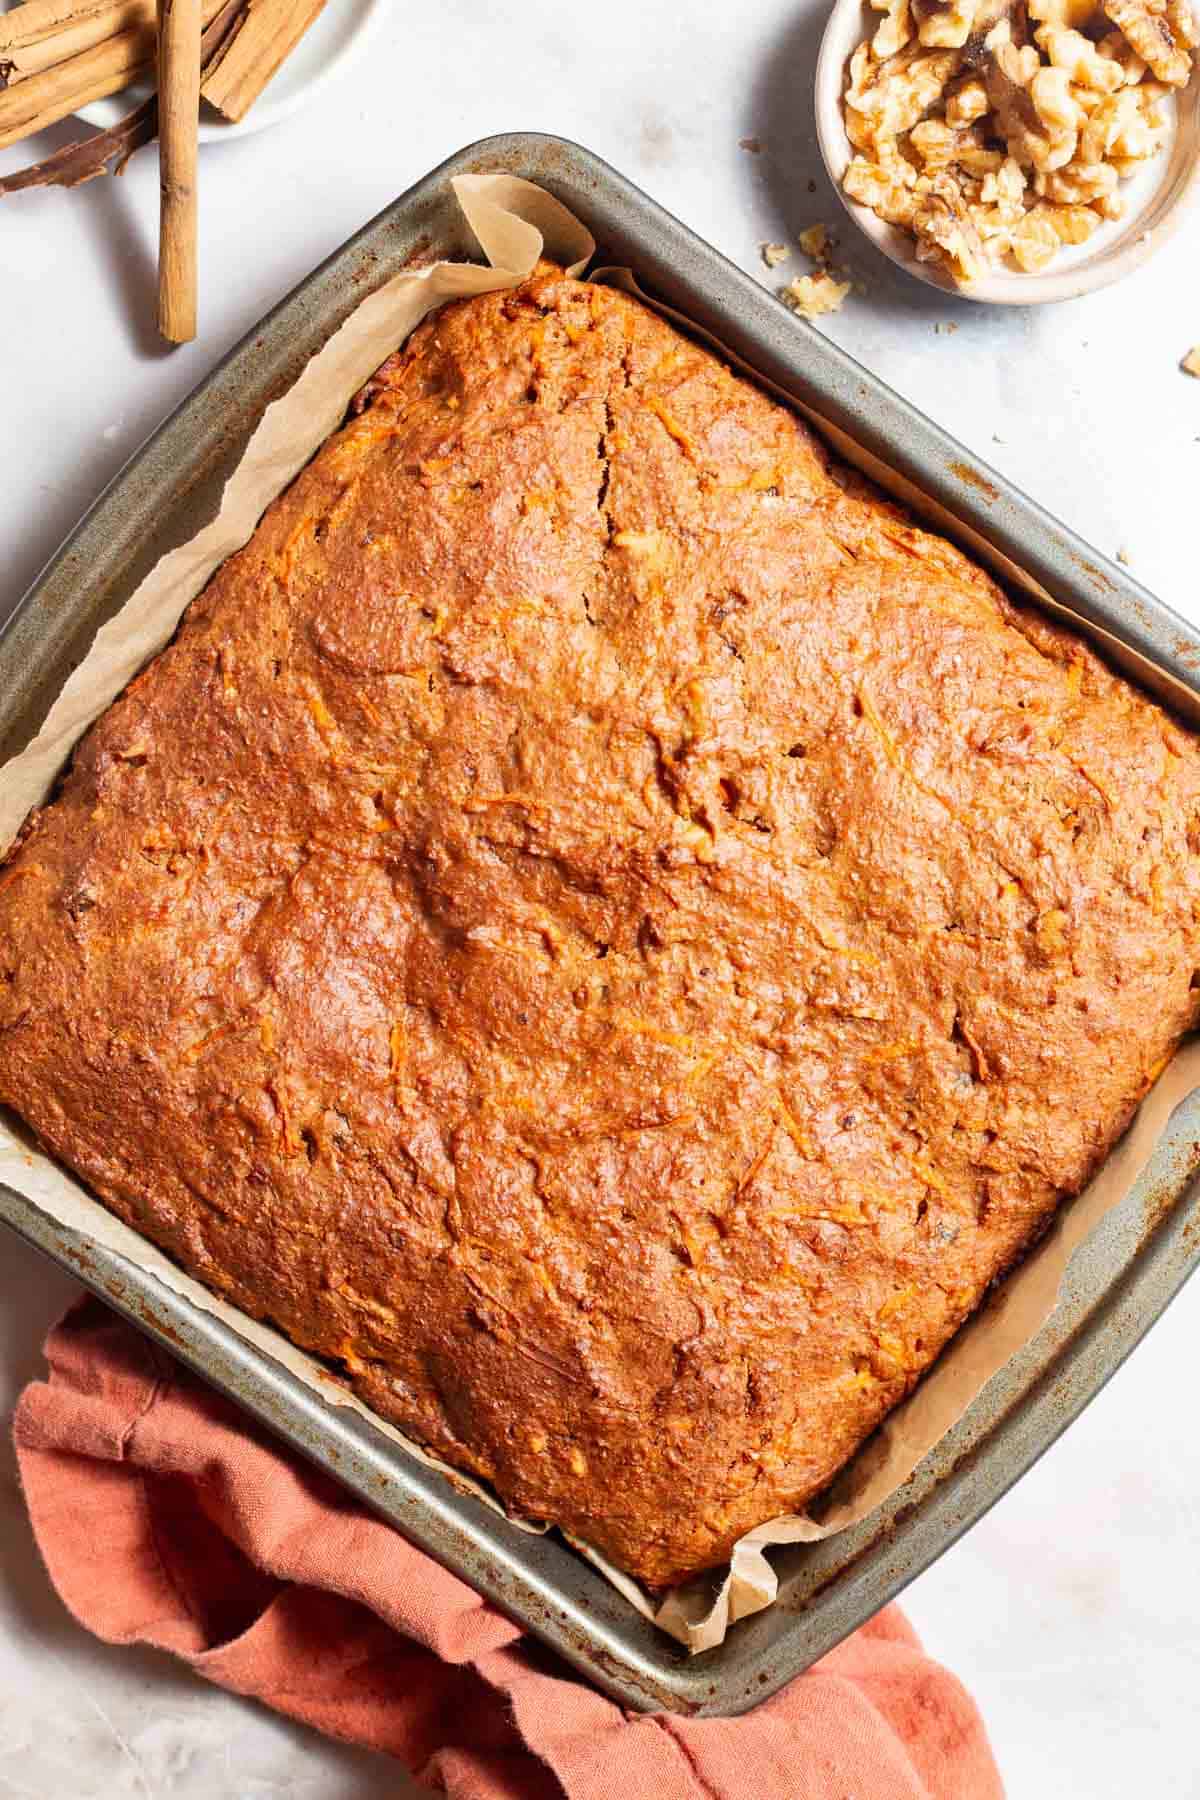 An overhead photo of a carrot cake in a parchment lined baking pan fresh out of the oven. Next to this is a kitchen towel and bowls of walnuts and cinnamon sticks.